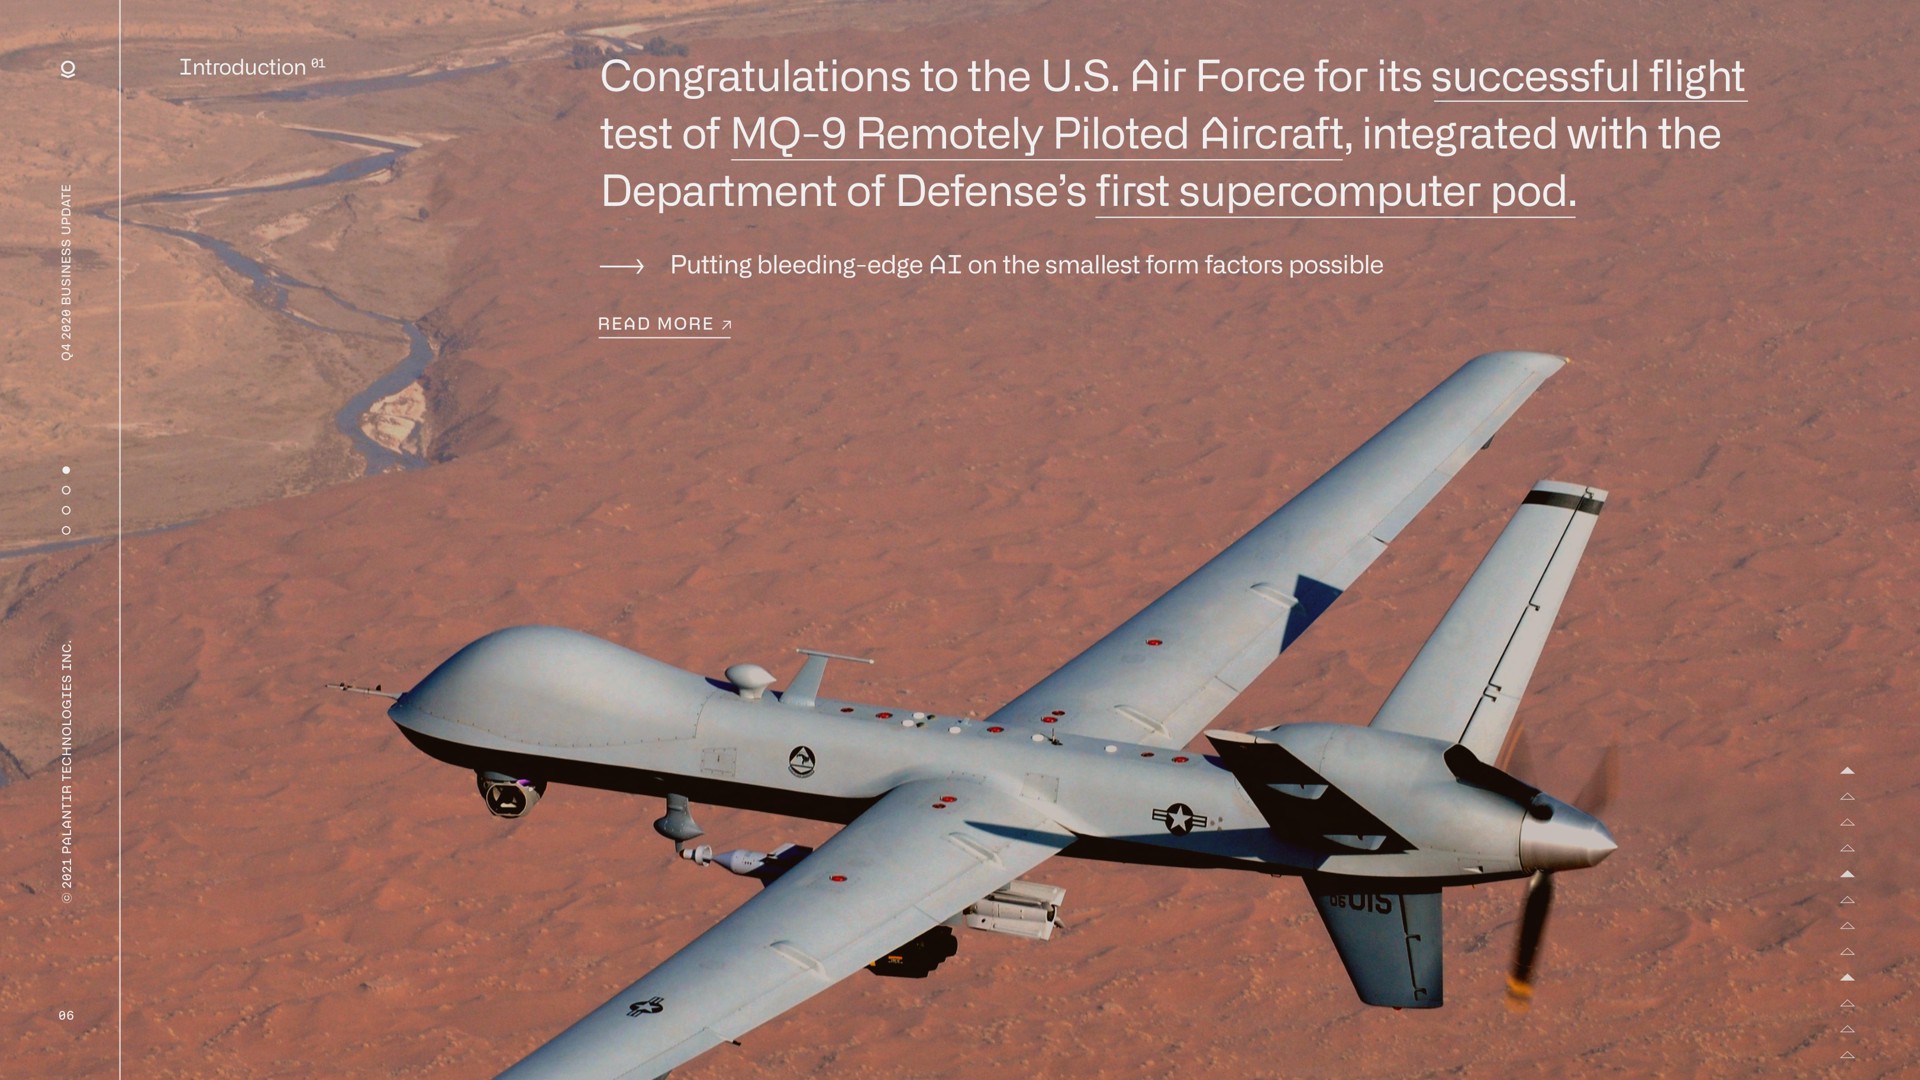 congratulations to the air force for its successful flight test of remotely piloted aircraft integrated with the department of defense first pod a | Palantir